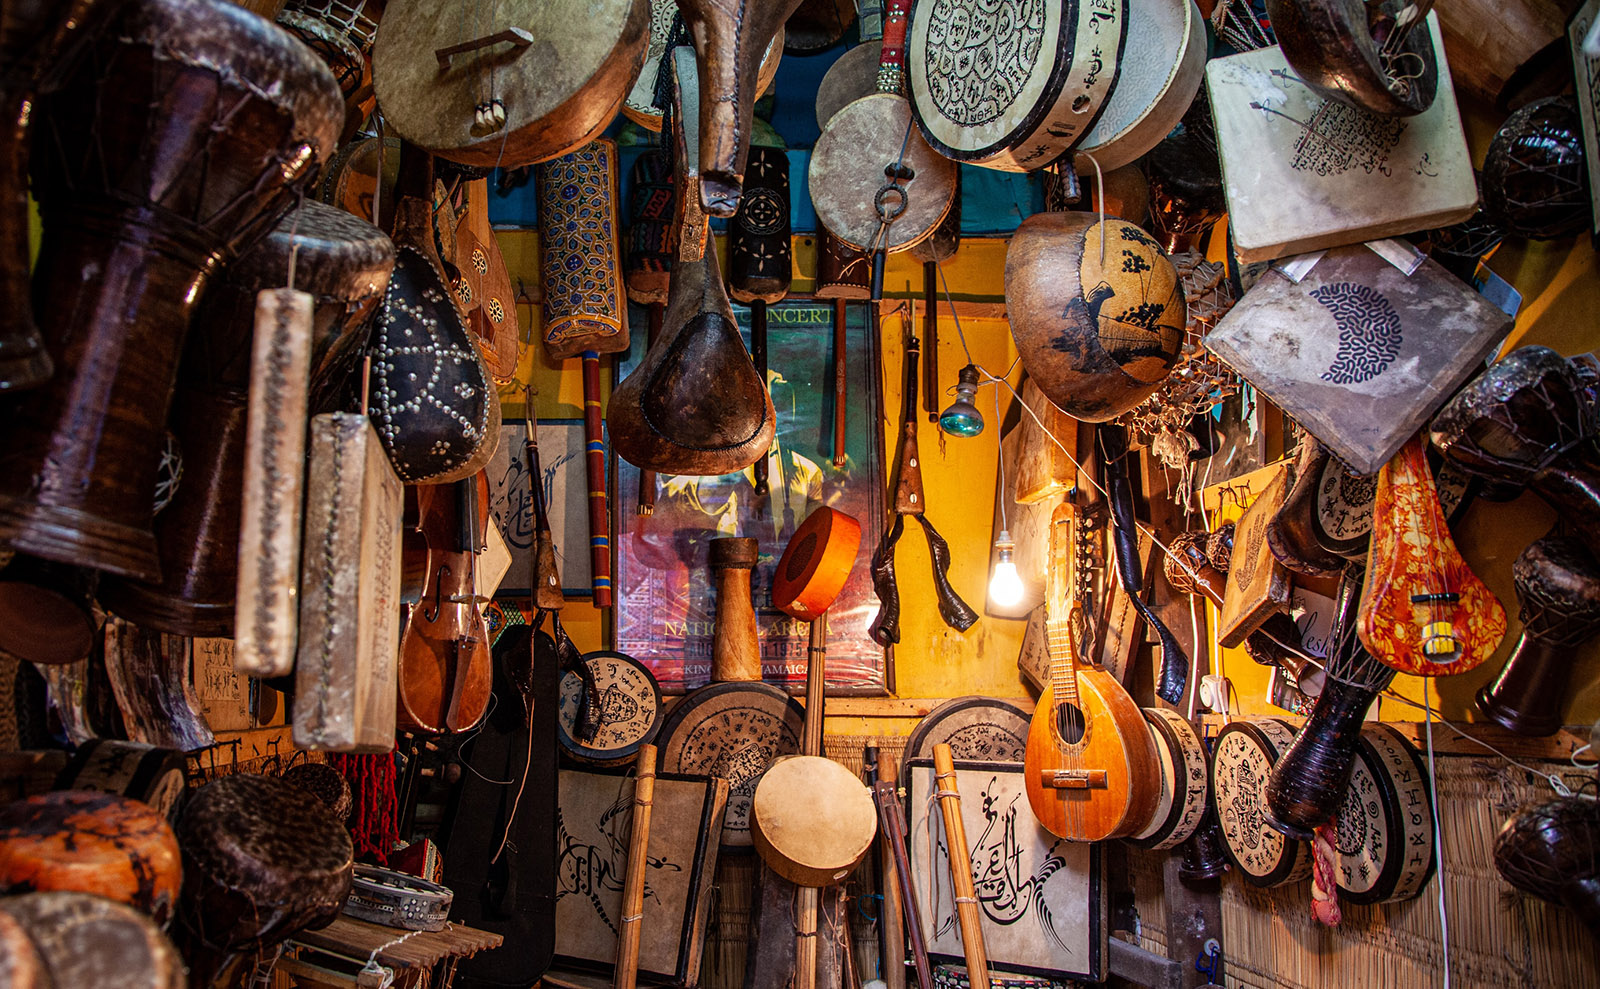 musicl instruments hanging on the wall of a shop